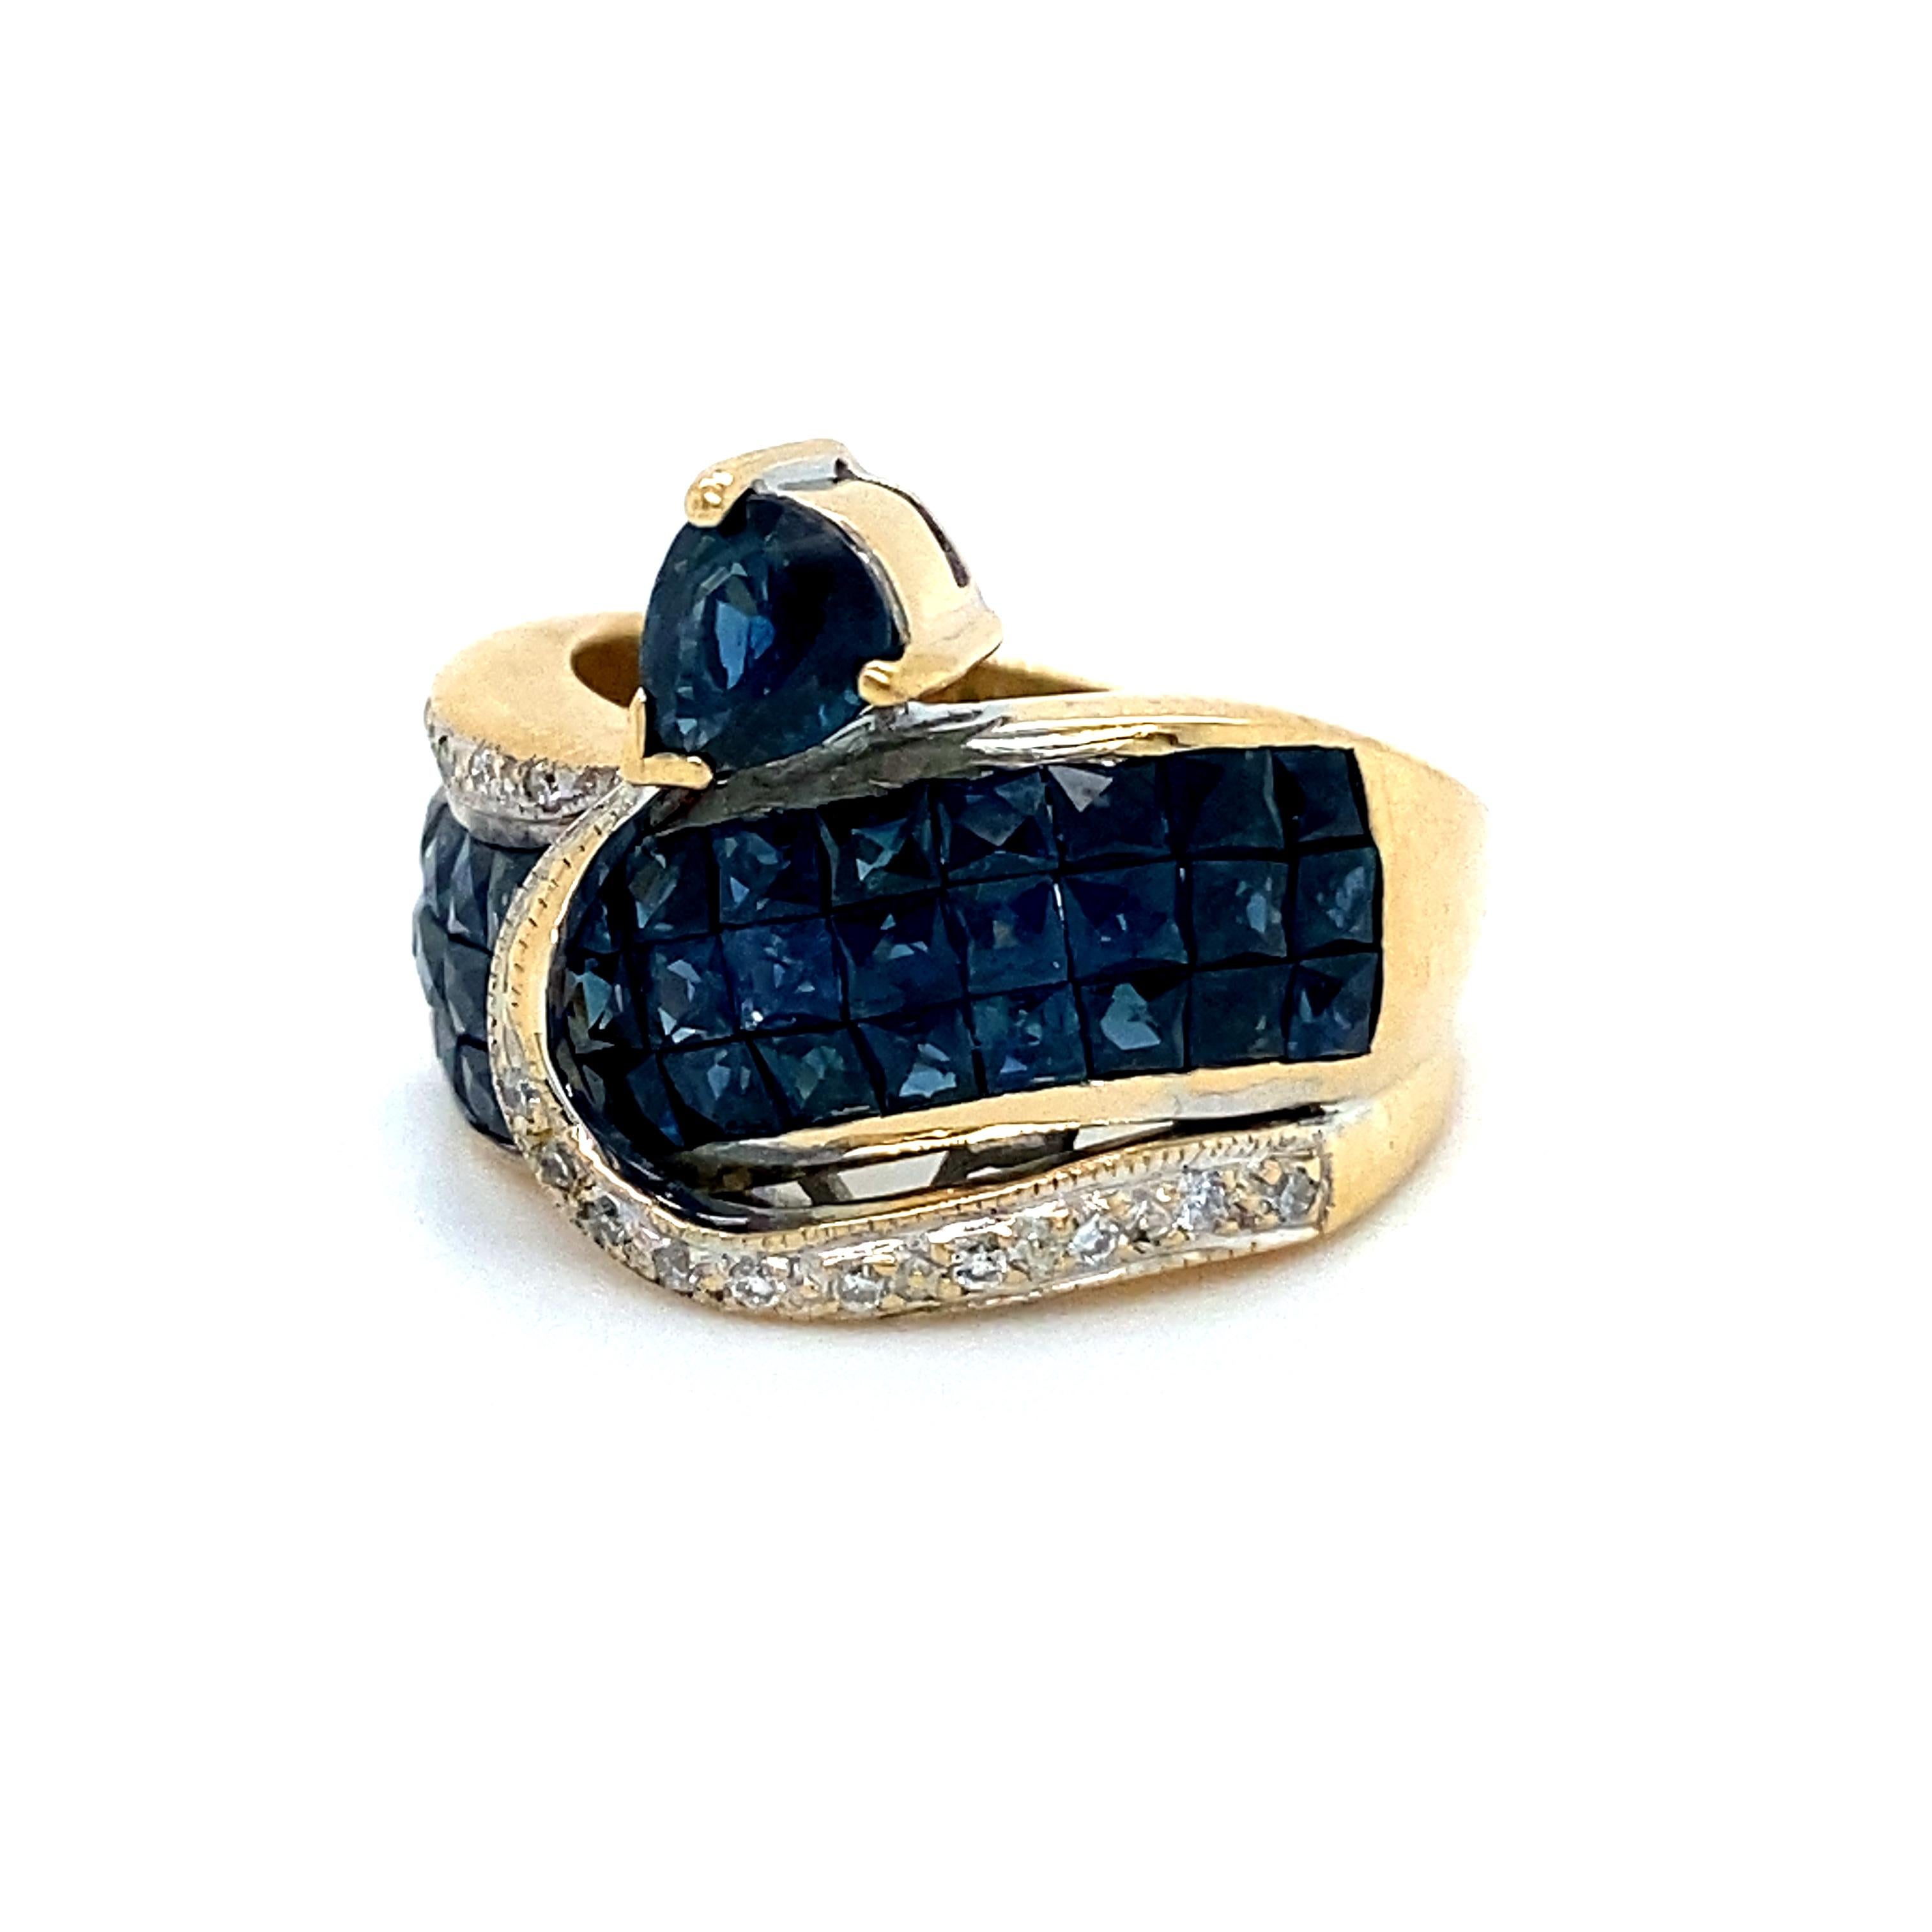 Modern Amazing Vintage 18K Yellow Gold Diamond and Sapphire Invisible Set Ring.